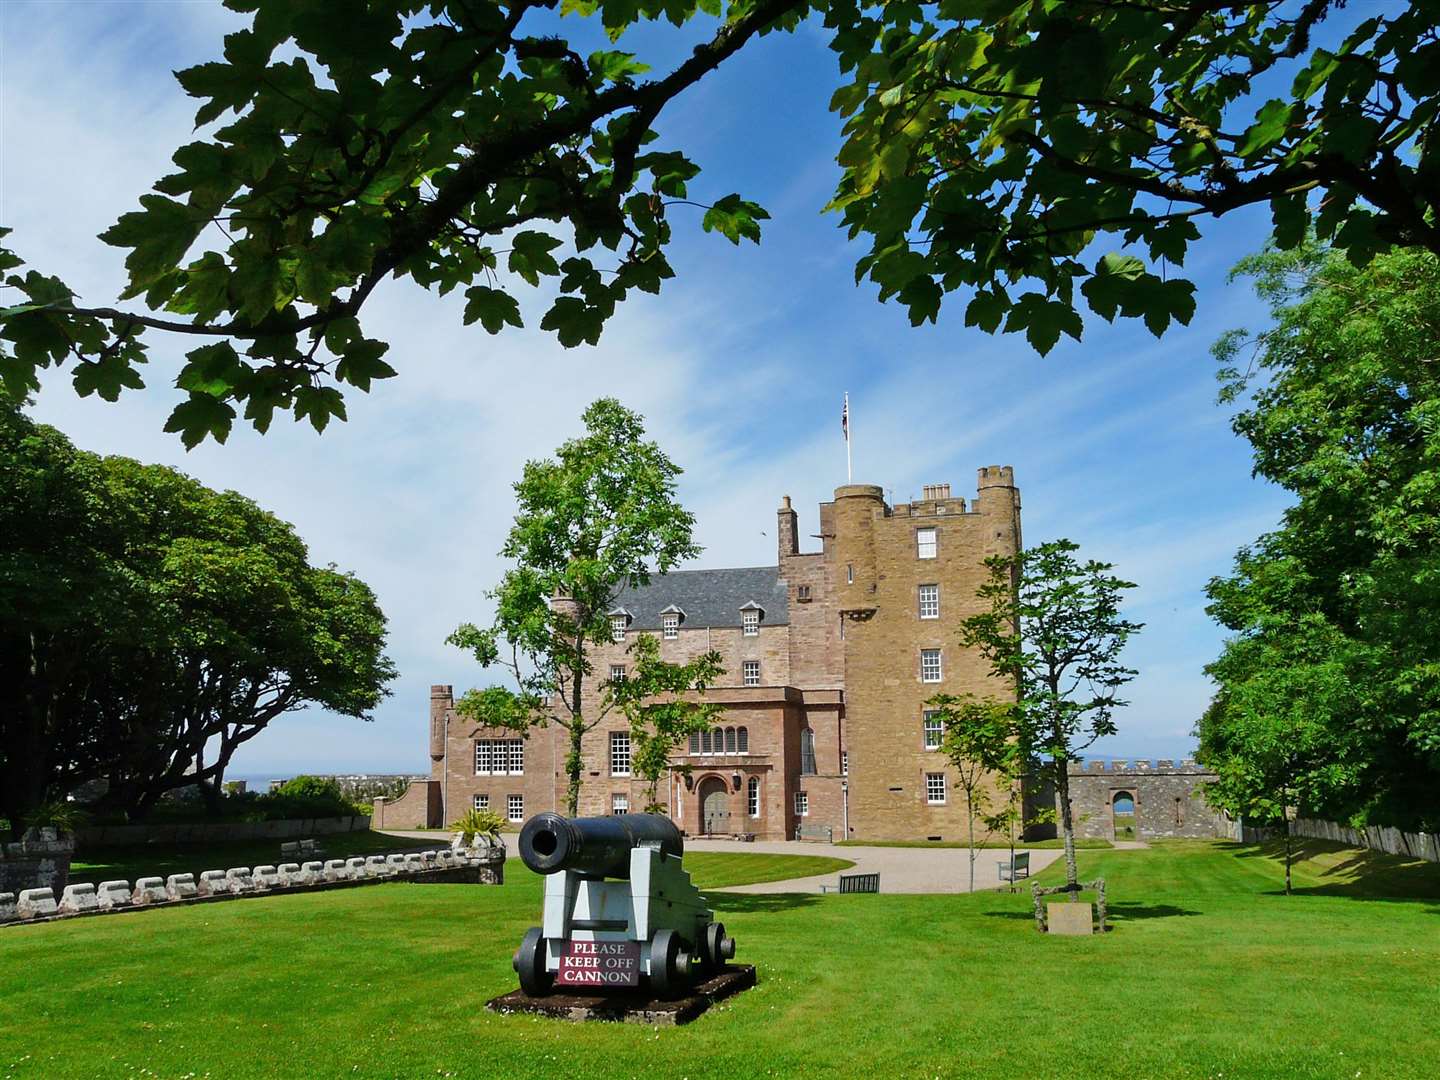 The Castle of Mey has been featuring prominently in national media coverage. Picture: Alan Hendry